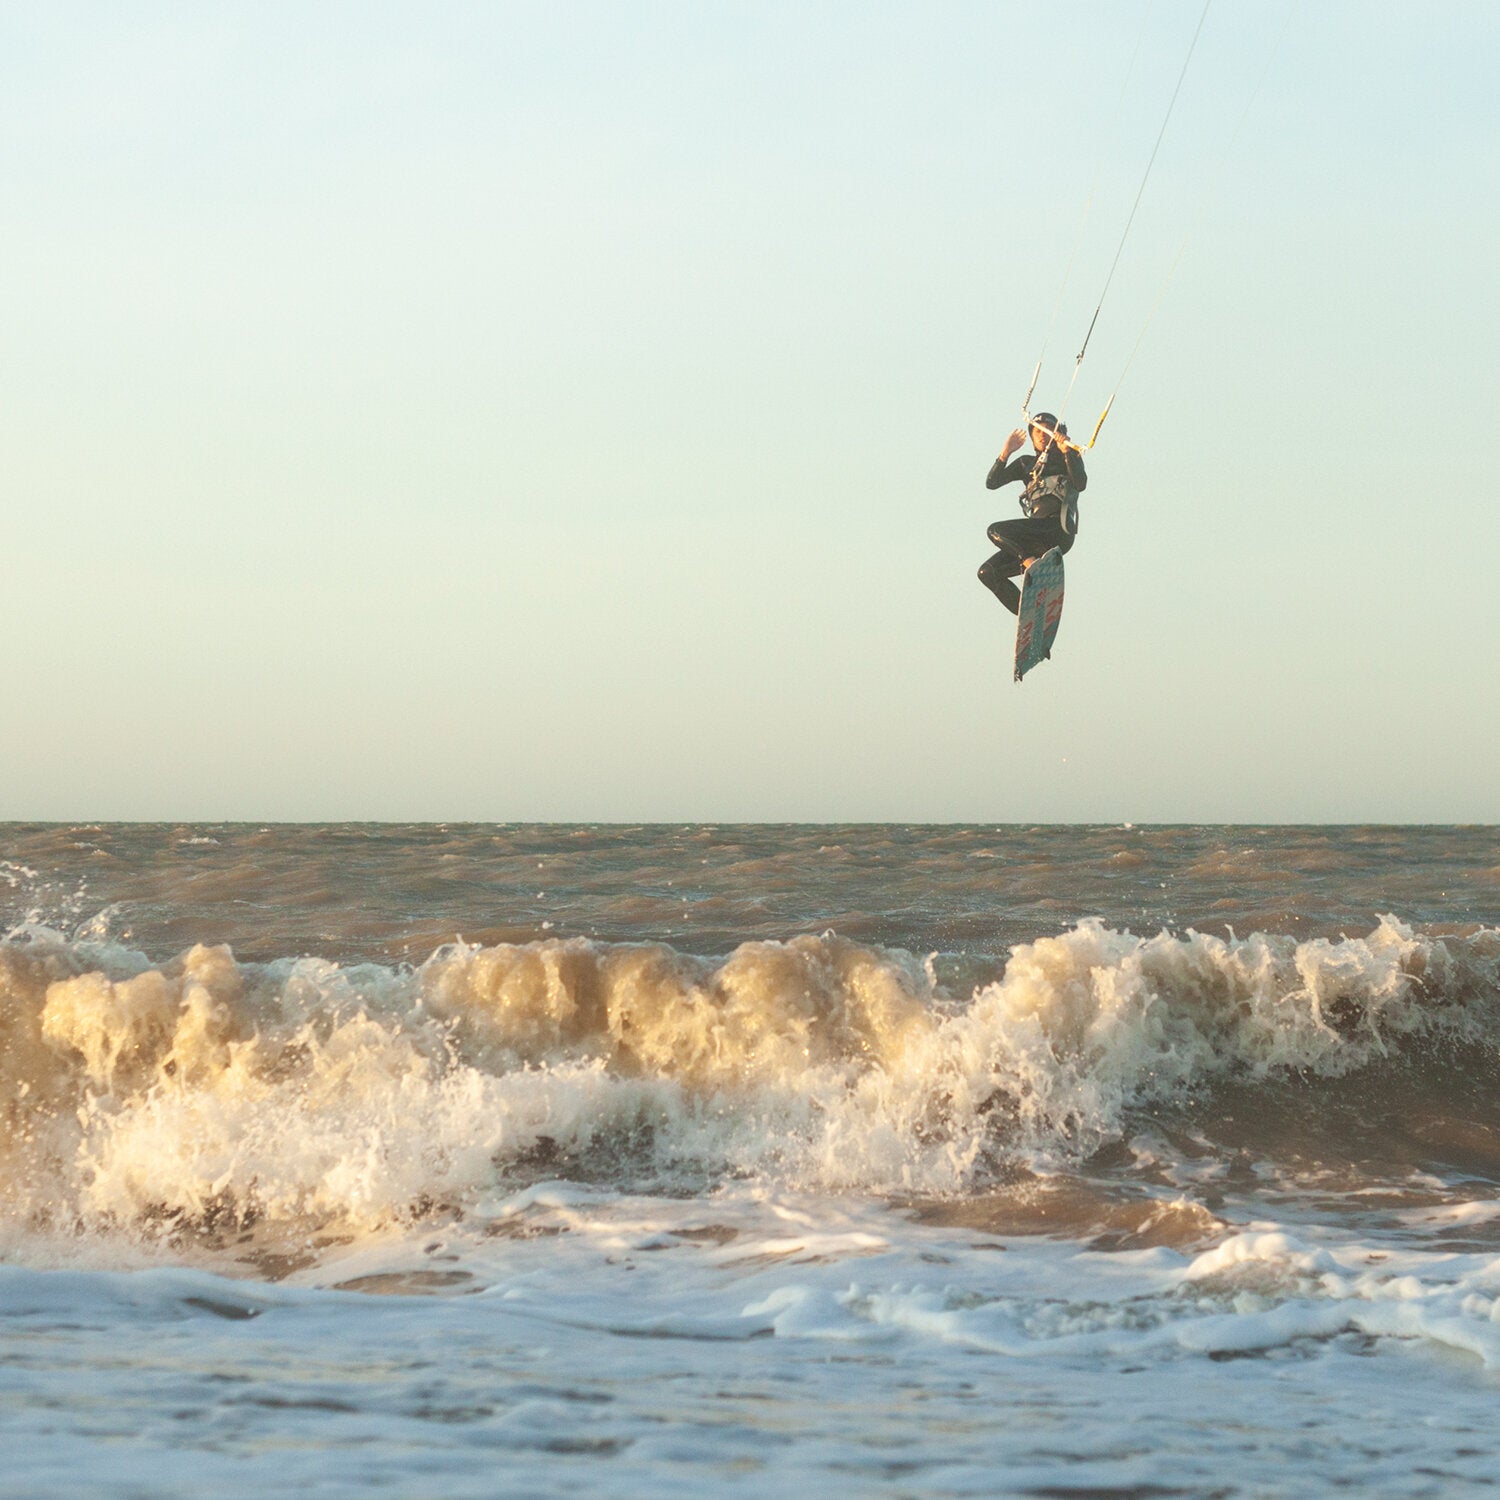 A private kitesurfing lesson in progress in Margate, Kent with Tide Watersports kitesurfing school and online watersports store.